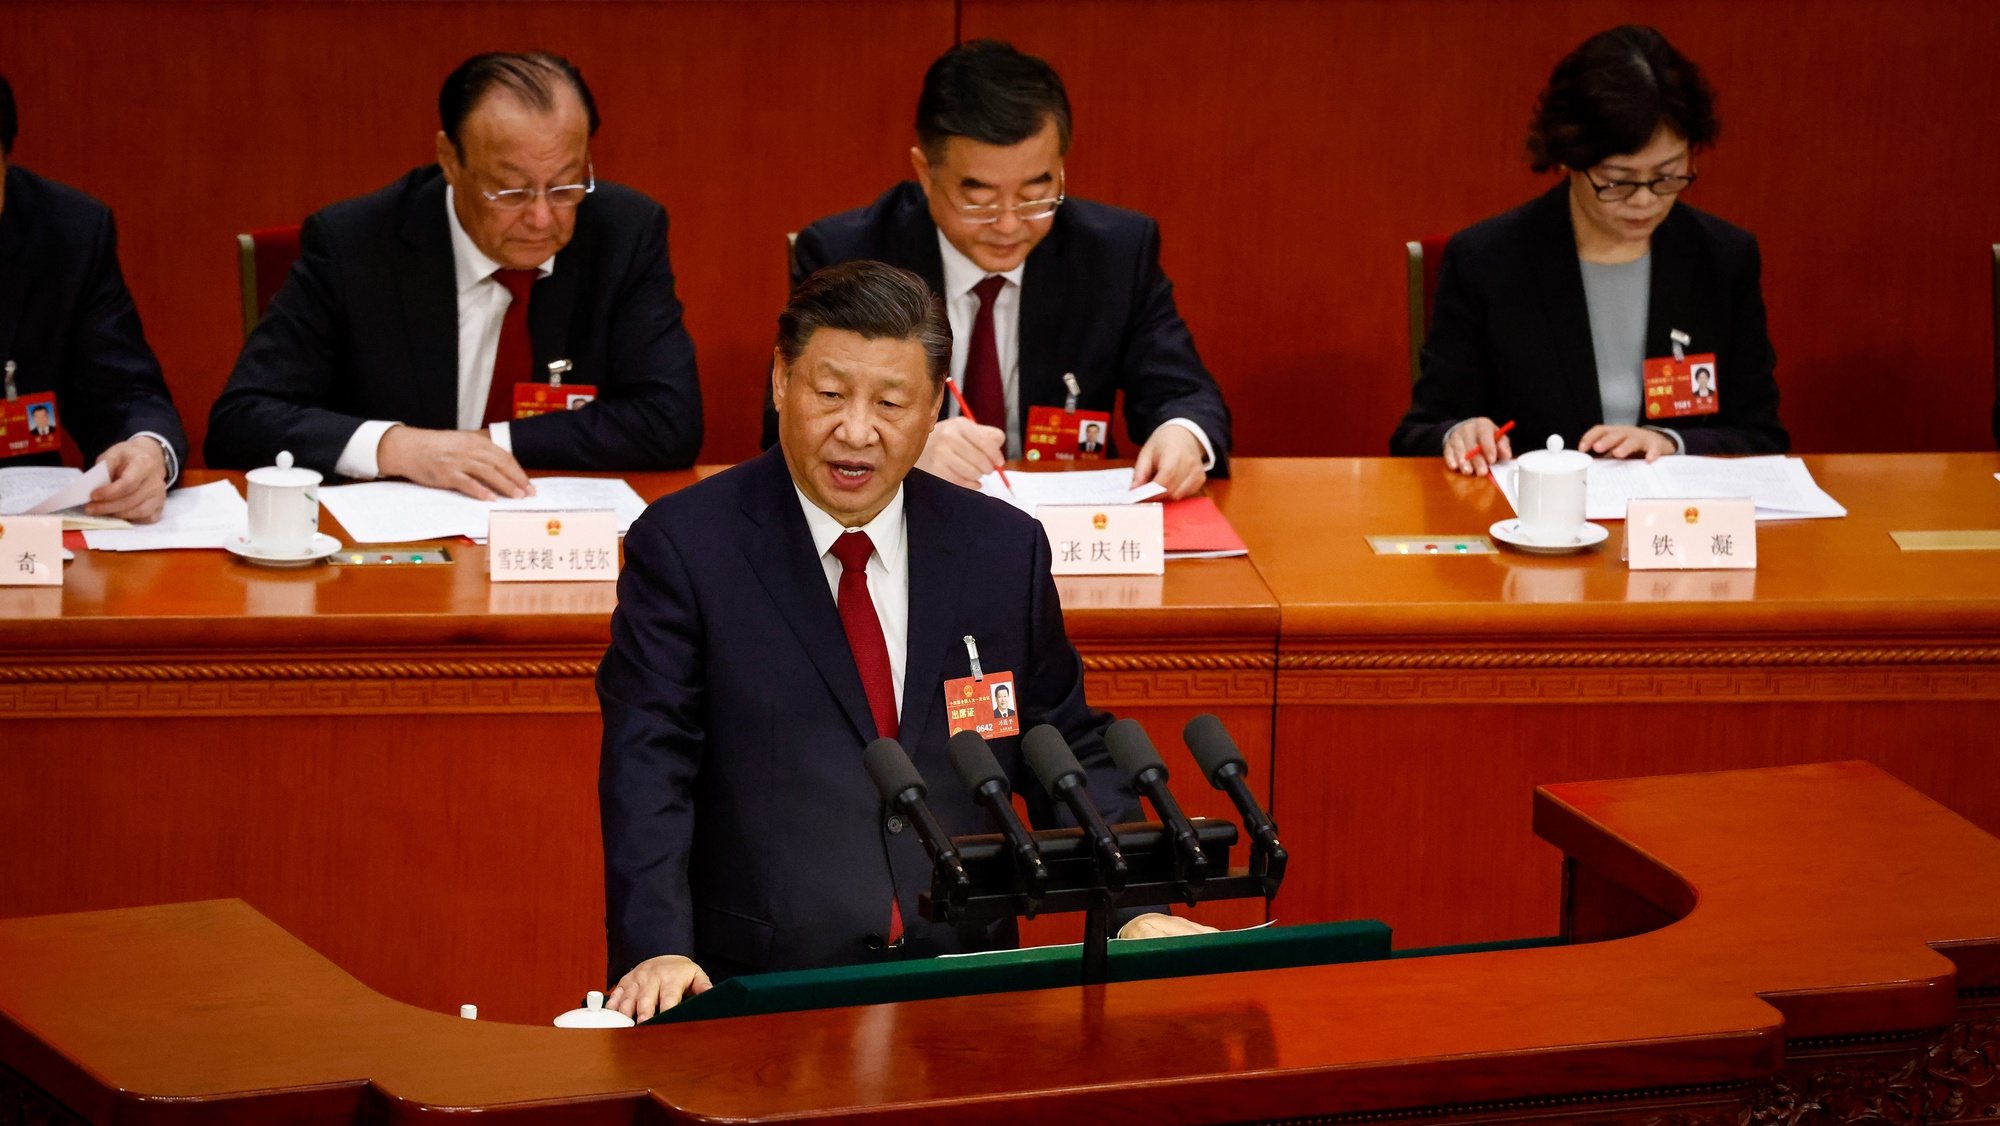 epa10519045 Chinese President Xi Jinping speaks during the Closing Session of the National People&#039;s Congress (NPC) at the Great Hall of the People, in Beijing, China, 13 March 2023. China holds two major annual political meetings, the National People&#039;s Congress (NPC) and the Chinese People&#039;s Political Consultative Conference (CPPCC) which run alongside and together are known as &#039;Lianghui&#039; or &#039;Two Sessions&#039;.  EPA/MARK R. CRISTINO